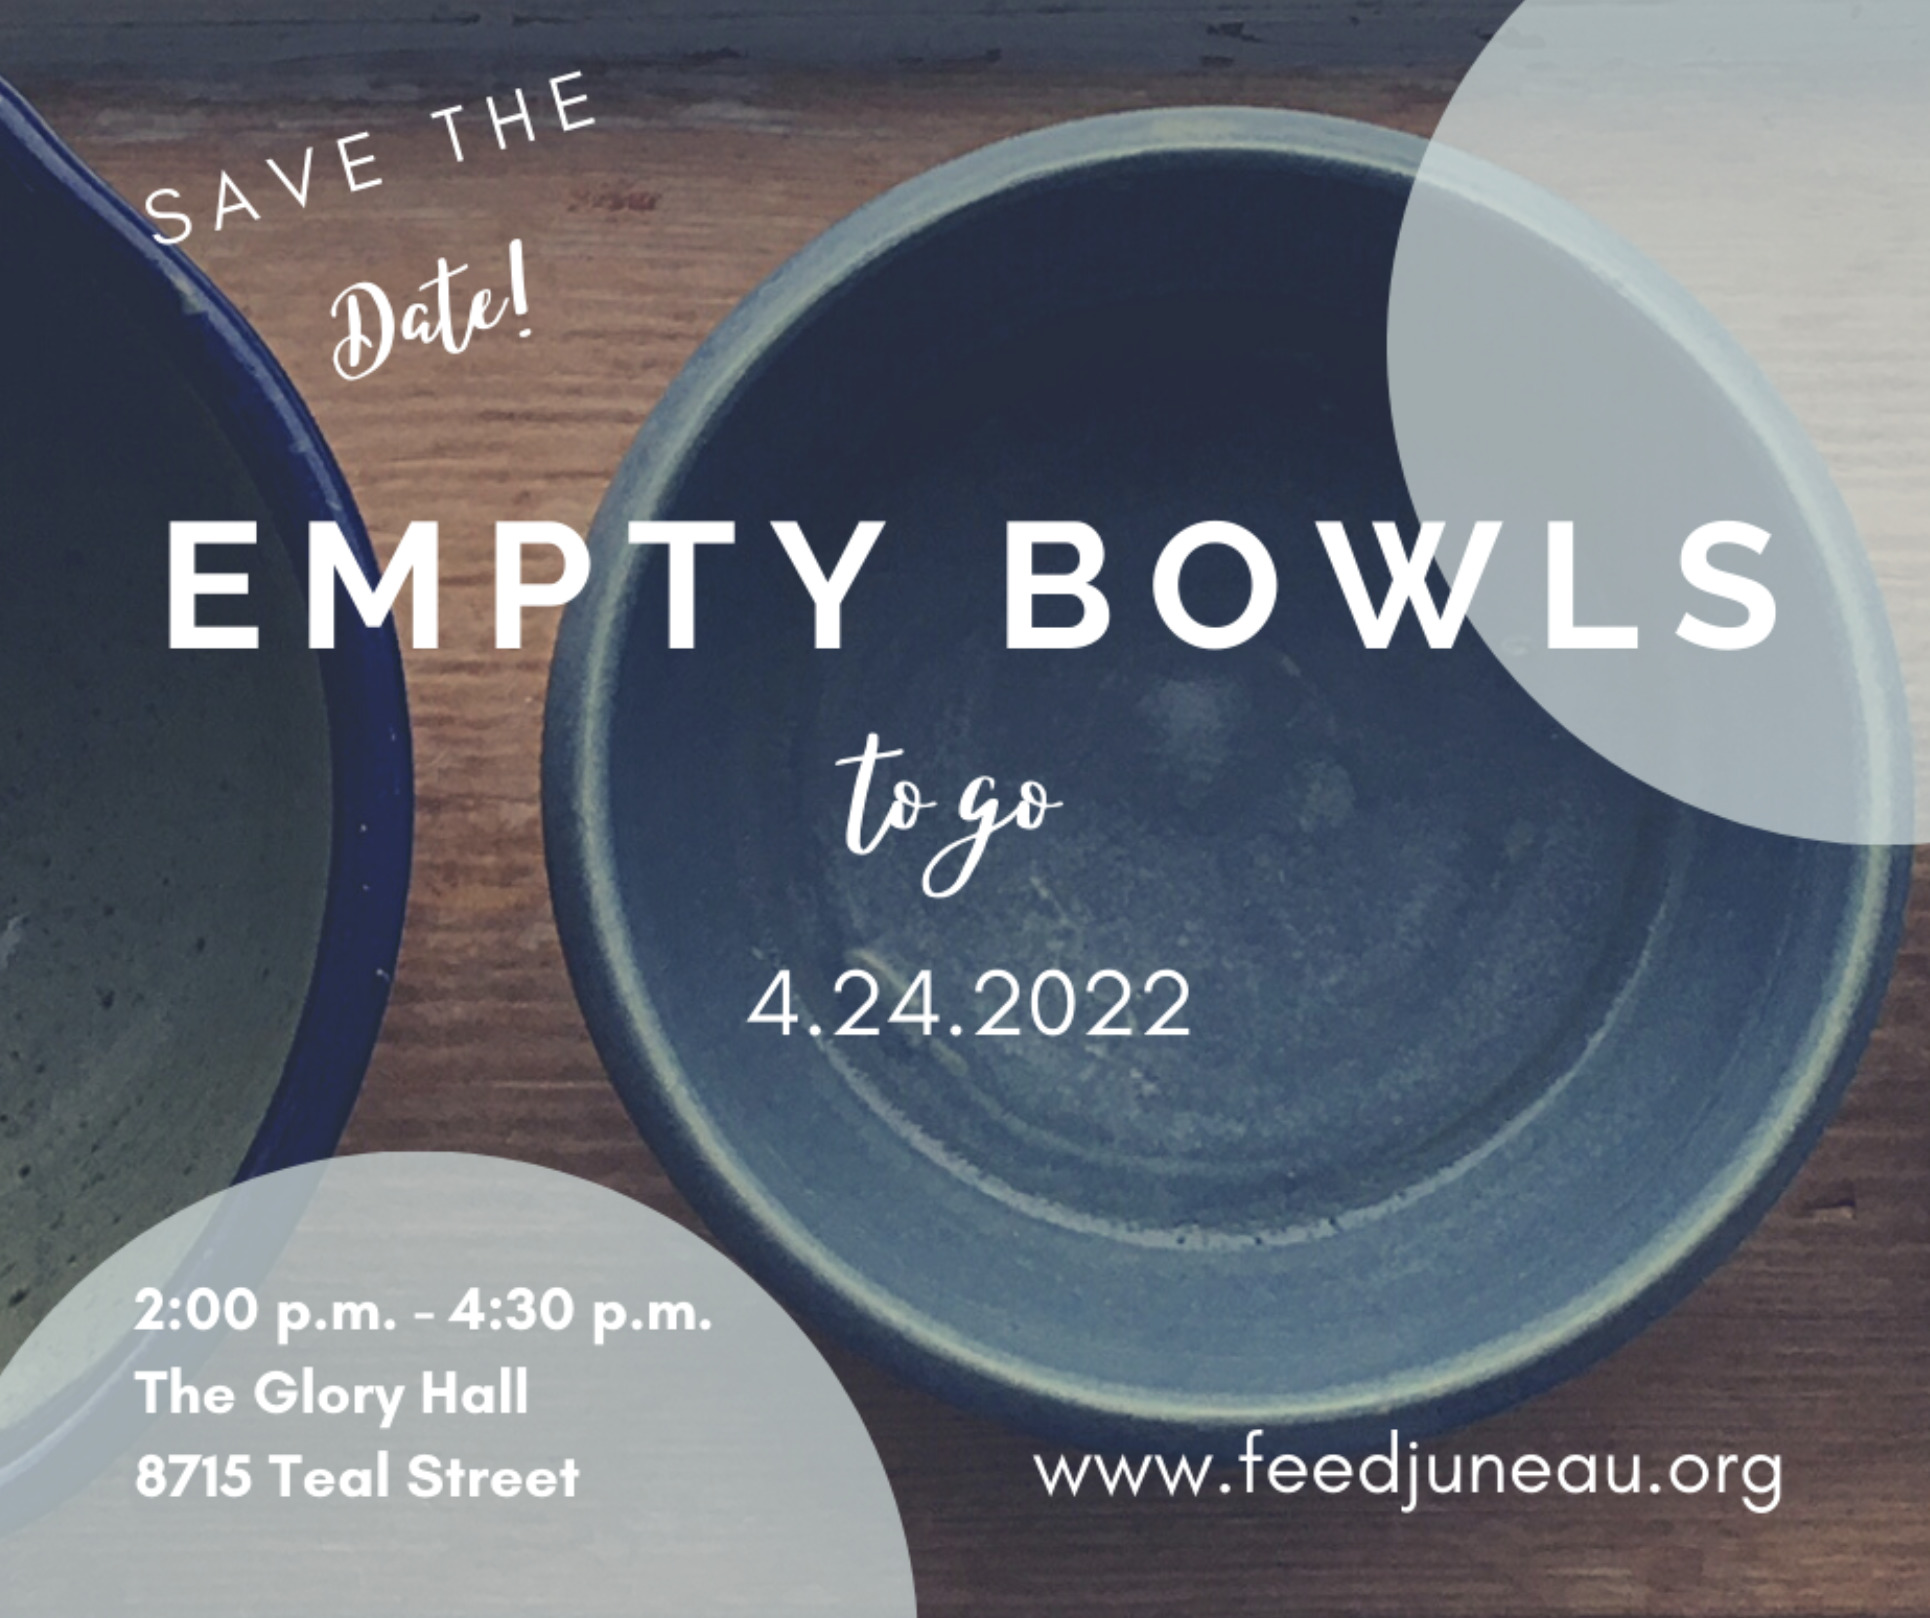 The handmade empty bowls are a thing of beauty, full of potential but